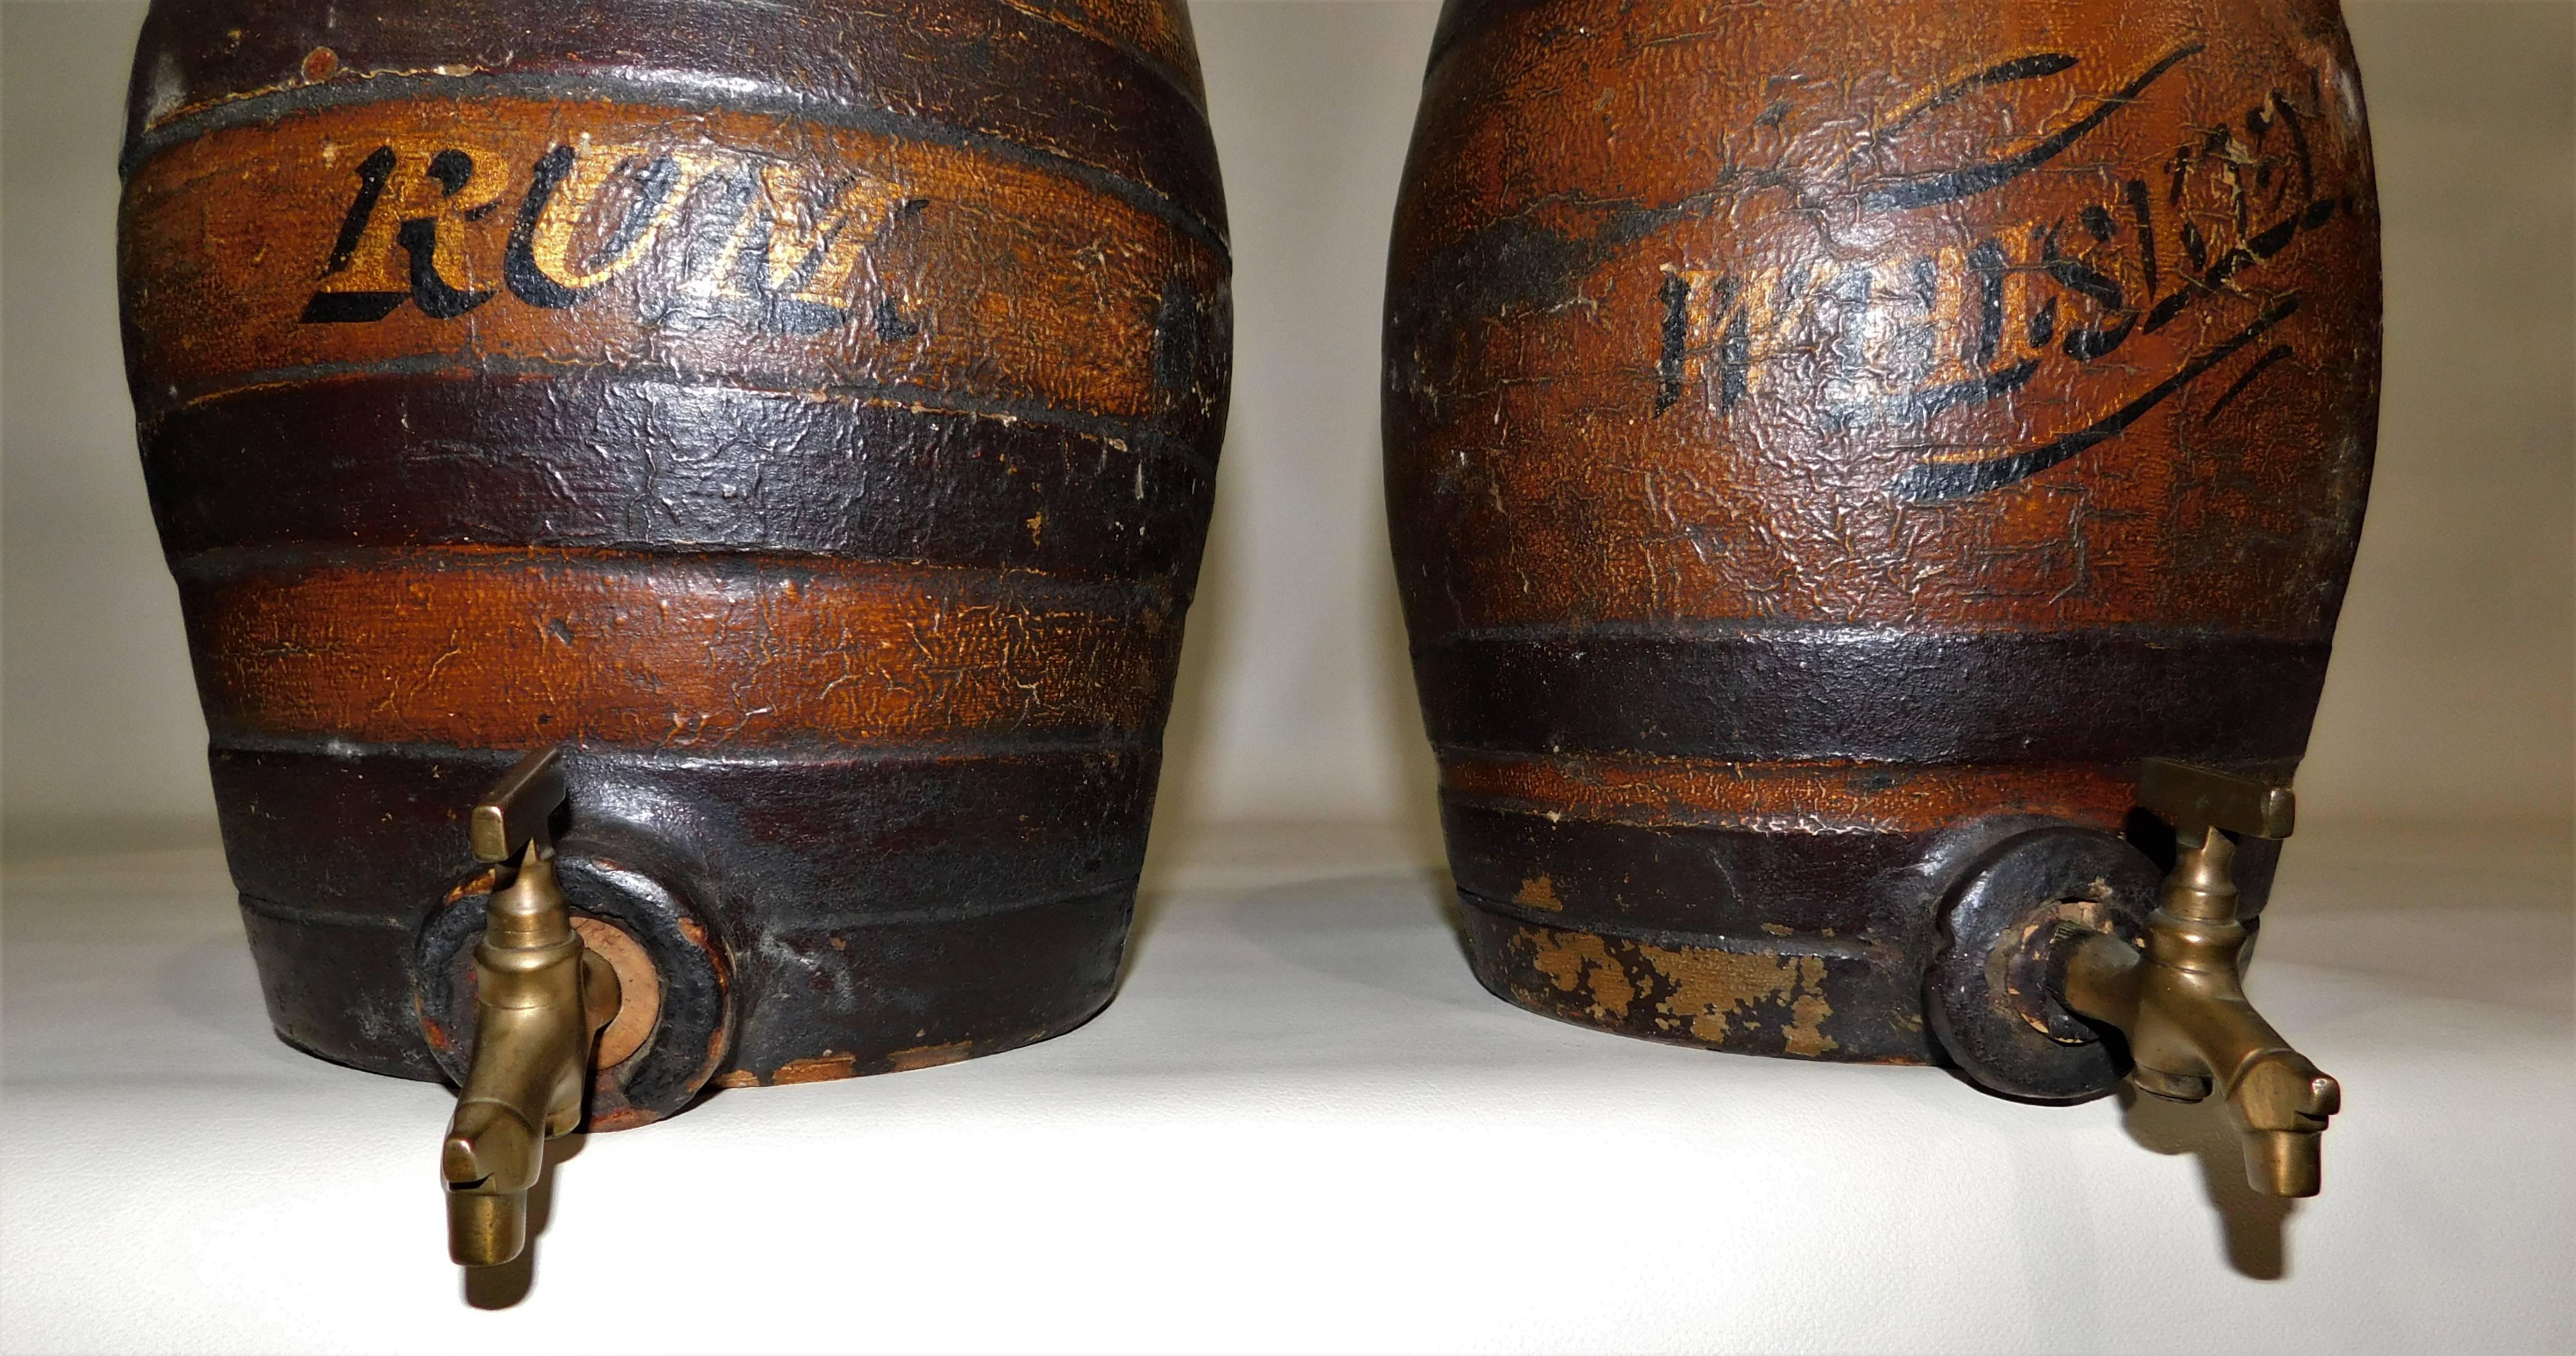 Large 19th century antique stoneware pottery keg barrel cask whiskey and rum bar liquor dispensers with brass spigots. Brass spouts are 2 inches long, rum keg is 10 inches high, whiskey keg is 10.5 inches high.